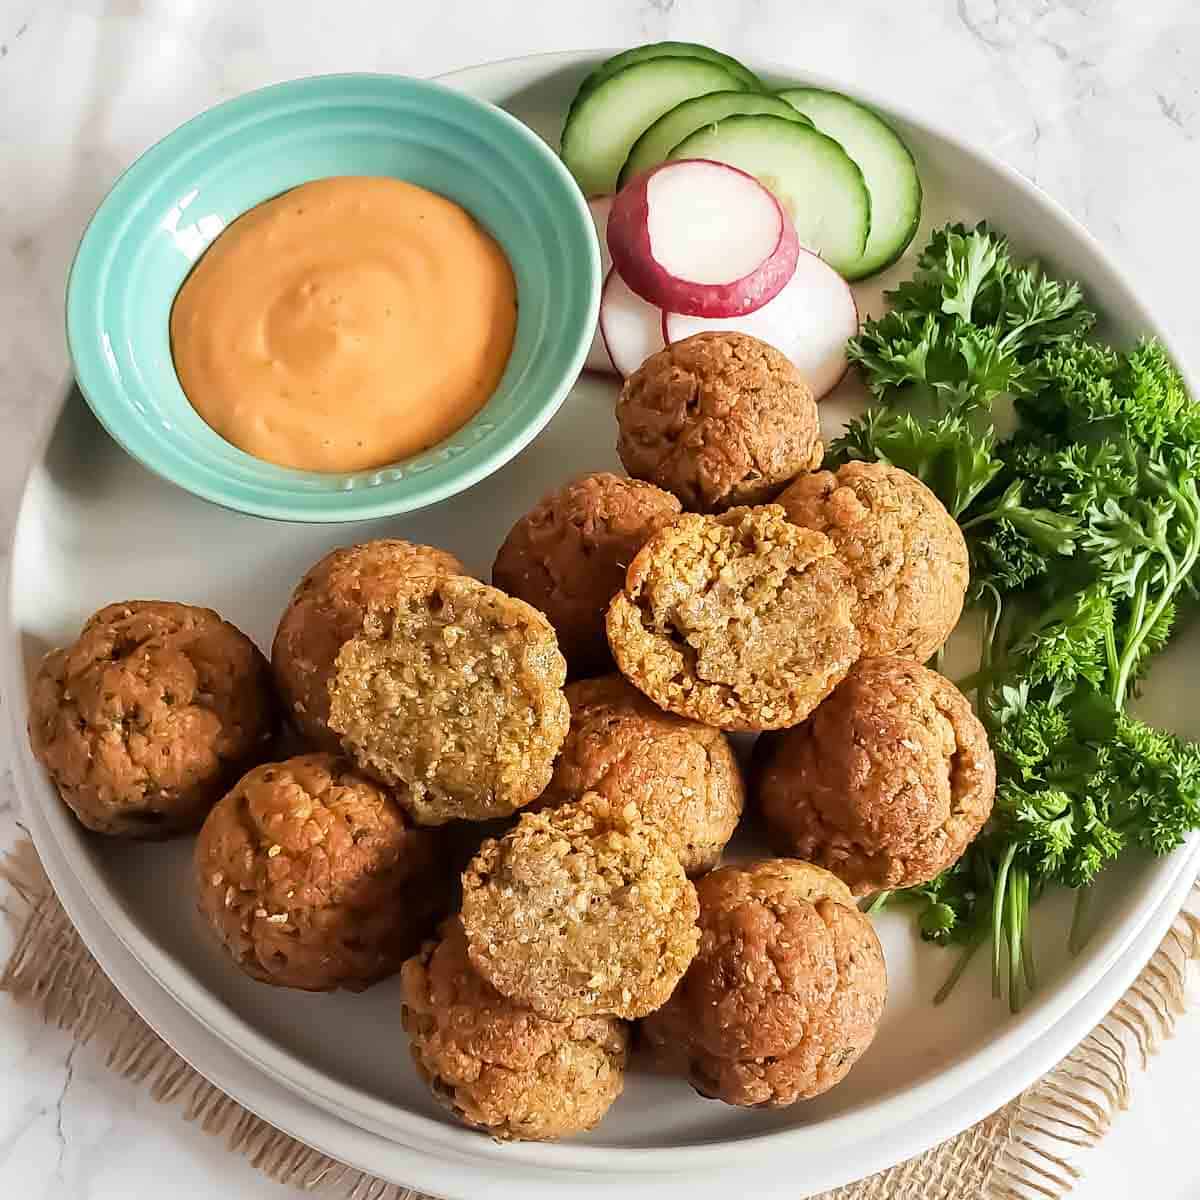 Baked falafel made with chickpeas and herb seasoning served as a middle Eastern Appetizer with dipping sauce.